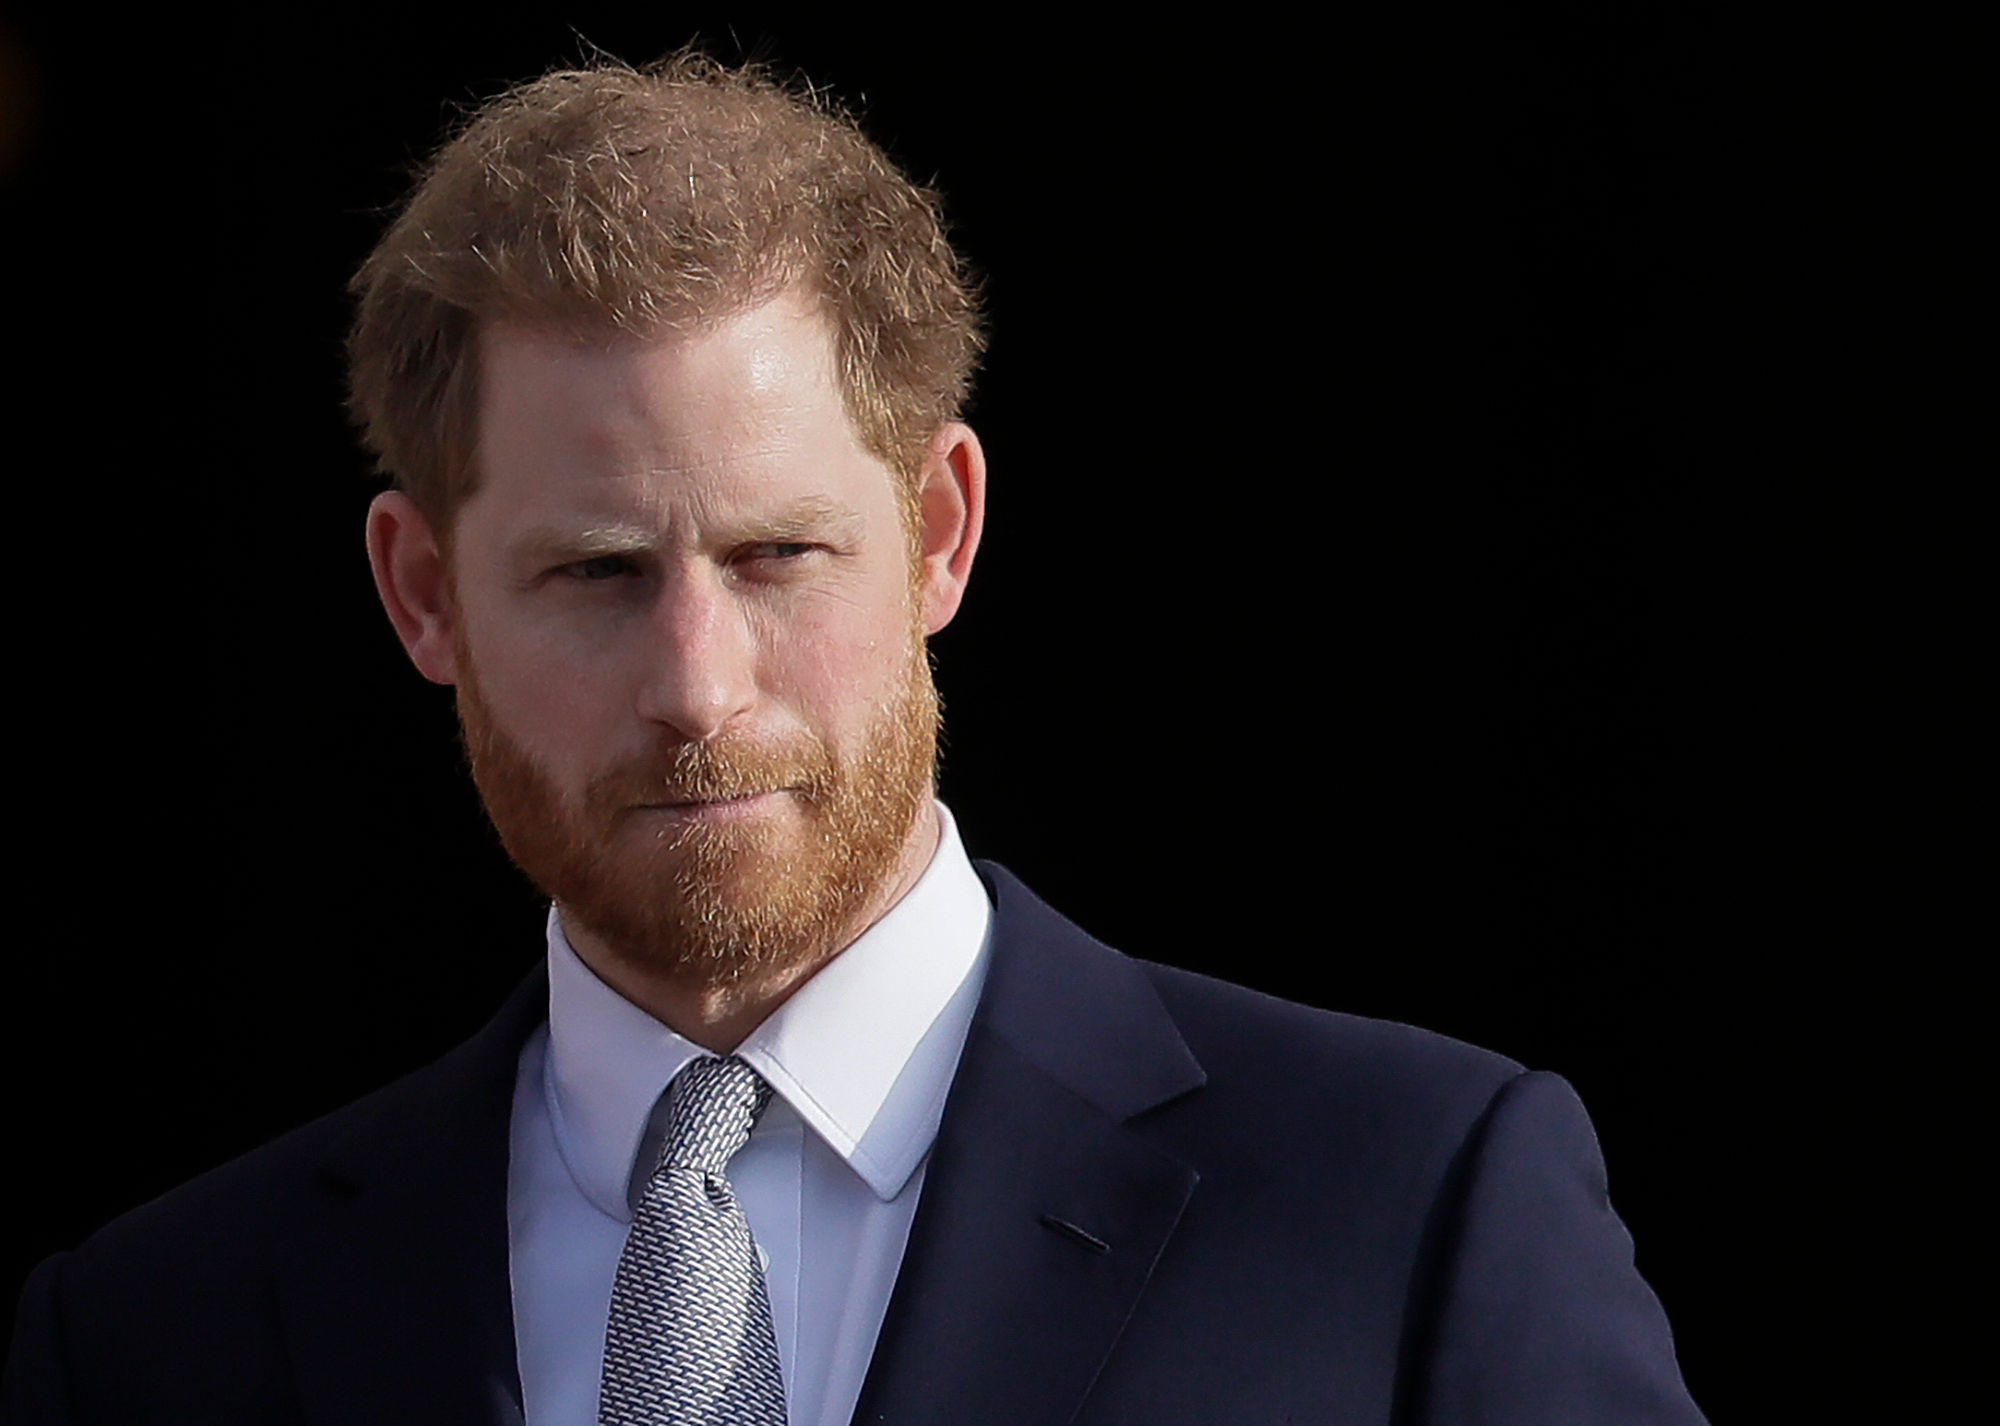 Here’s why Prince Harry finds it unsafe to attend Queen’s platinum jubilee